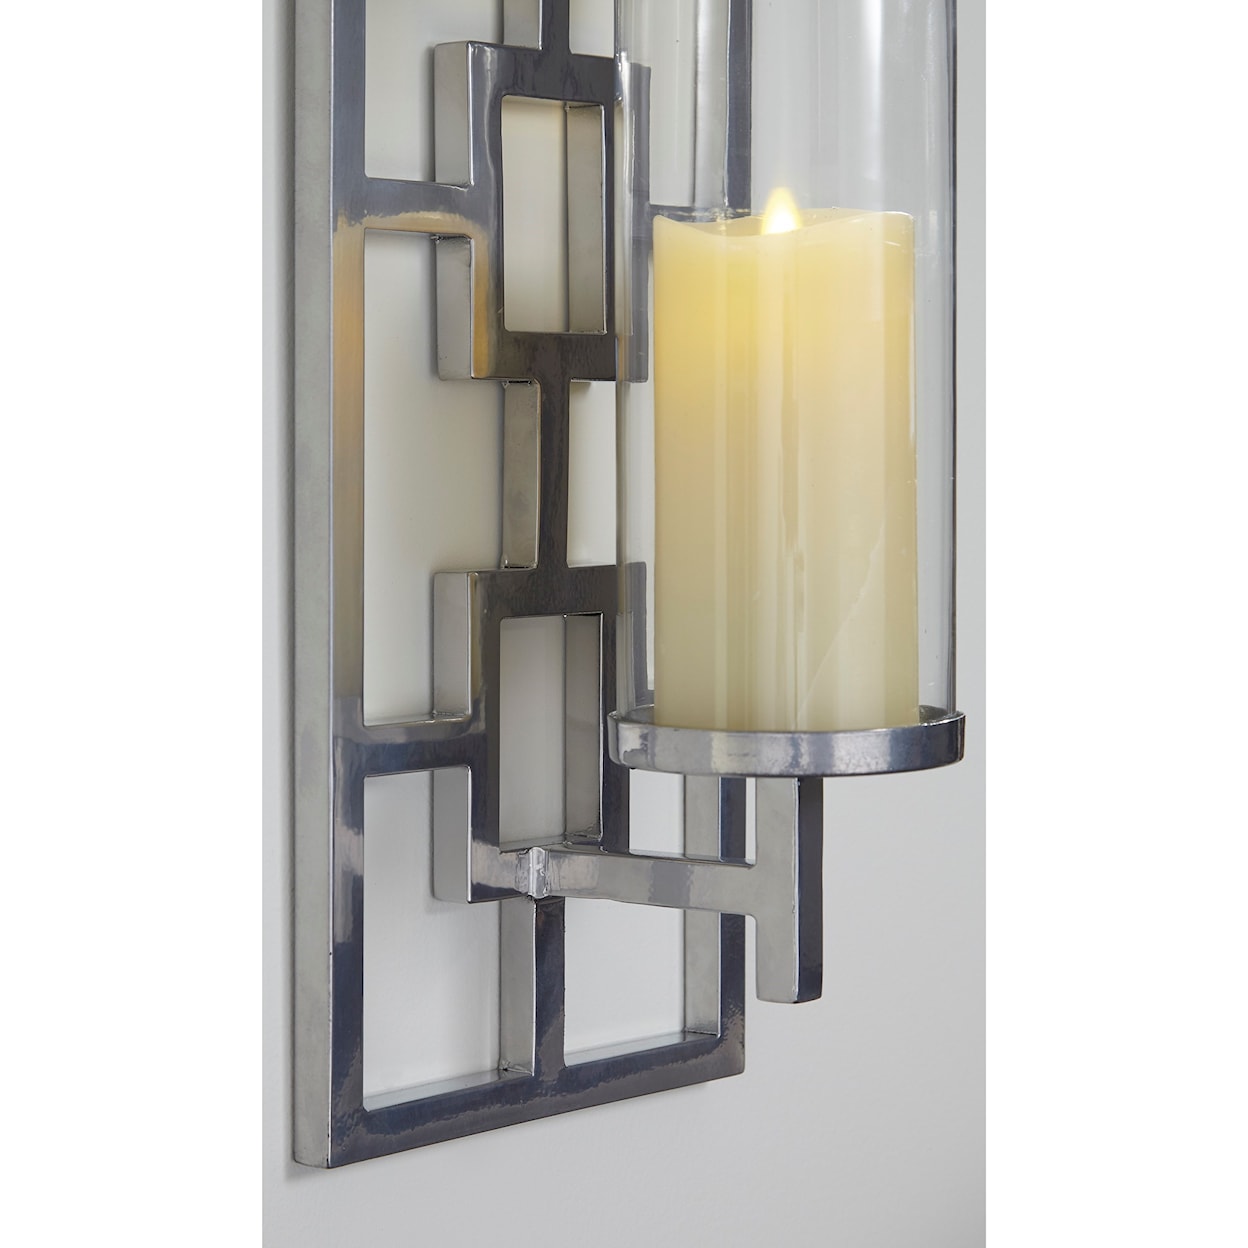 Benchcraft Wall Art Brede Silver Finish Wall Sconce